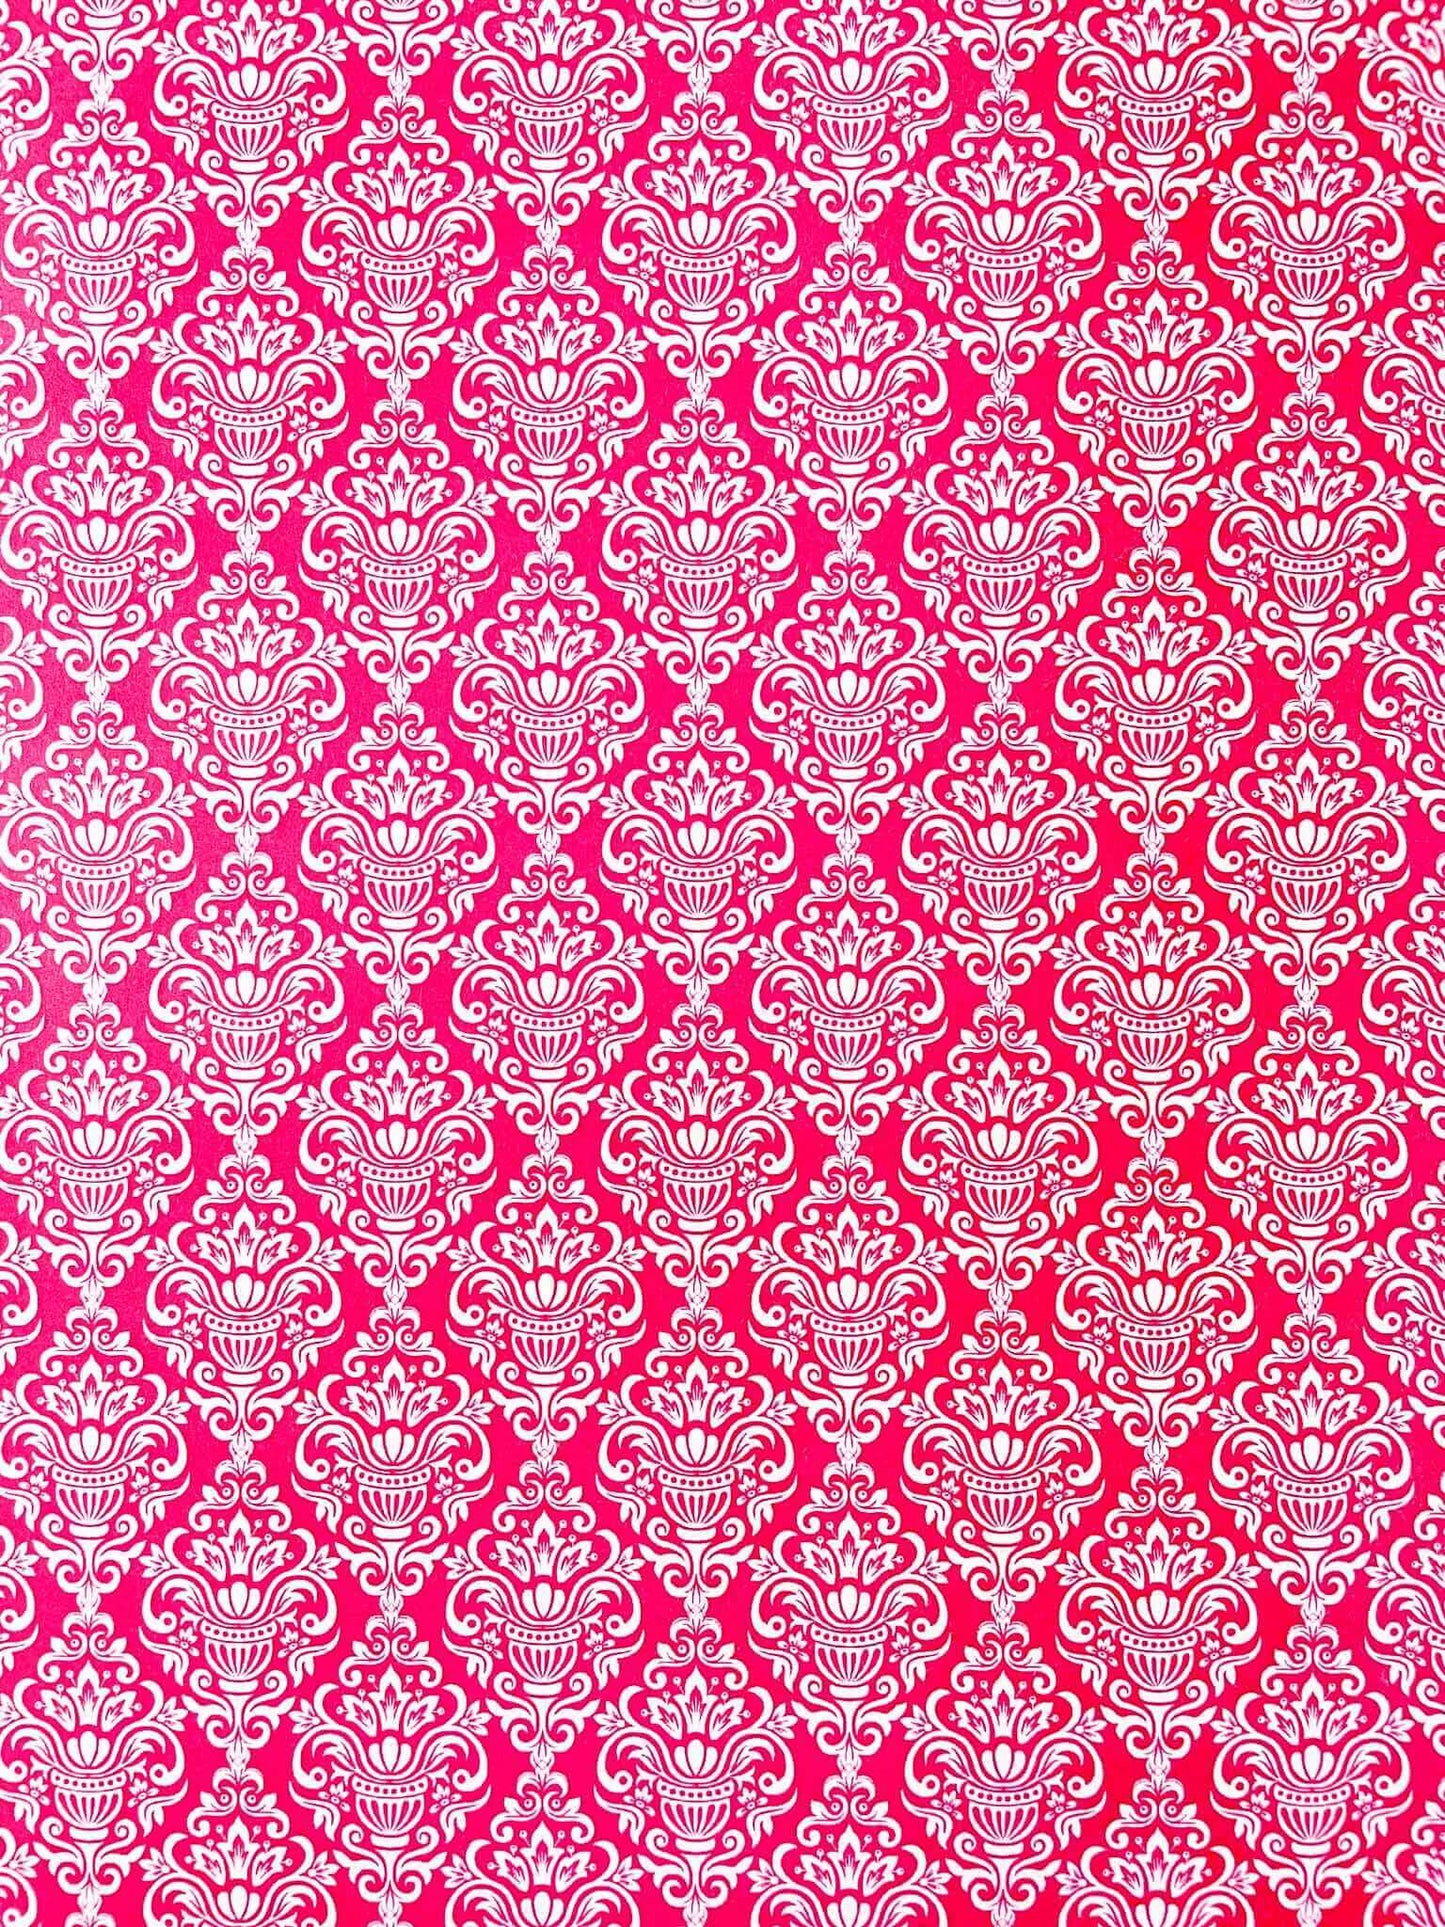 alessandra-rasperry-red-and-white-vintage-pattern-paper-a4